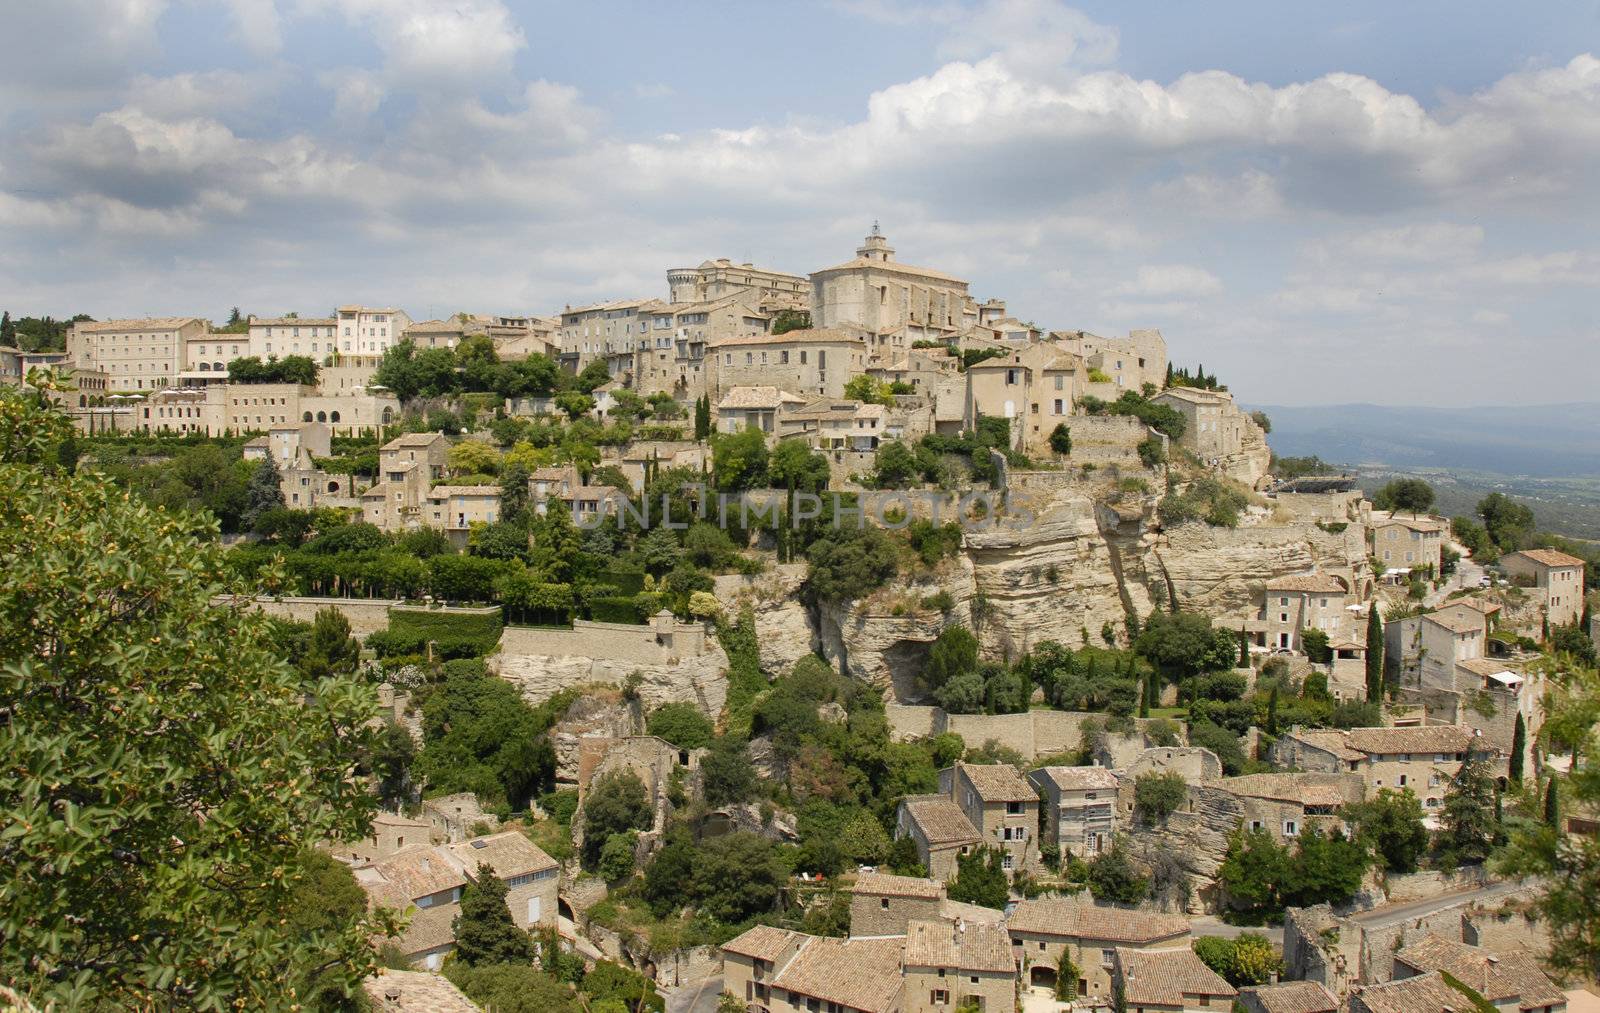 Gordes is a typical village of the Provence build on a hill